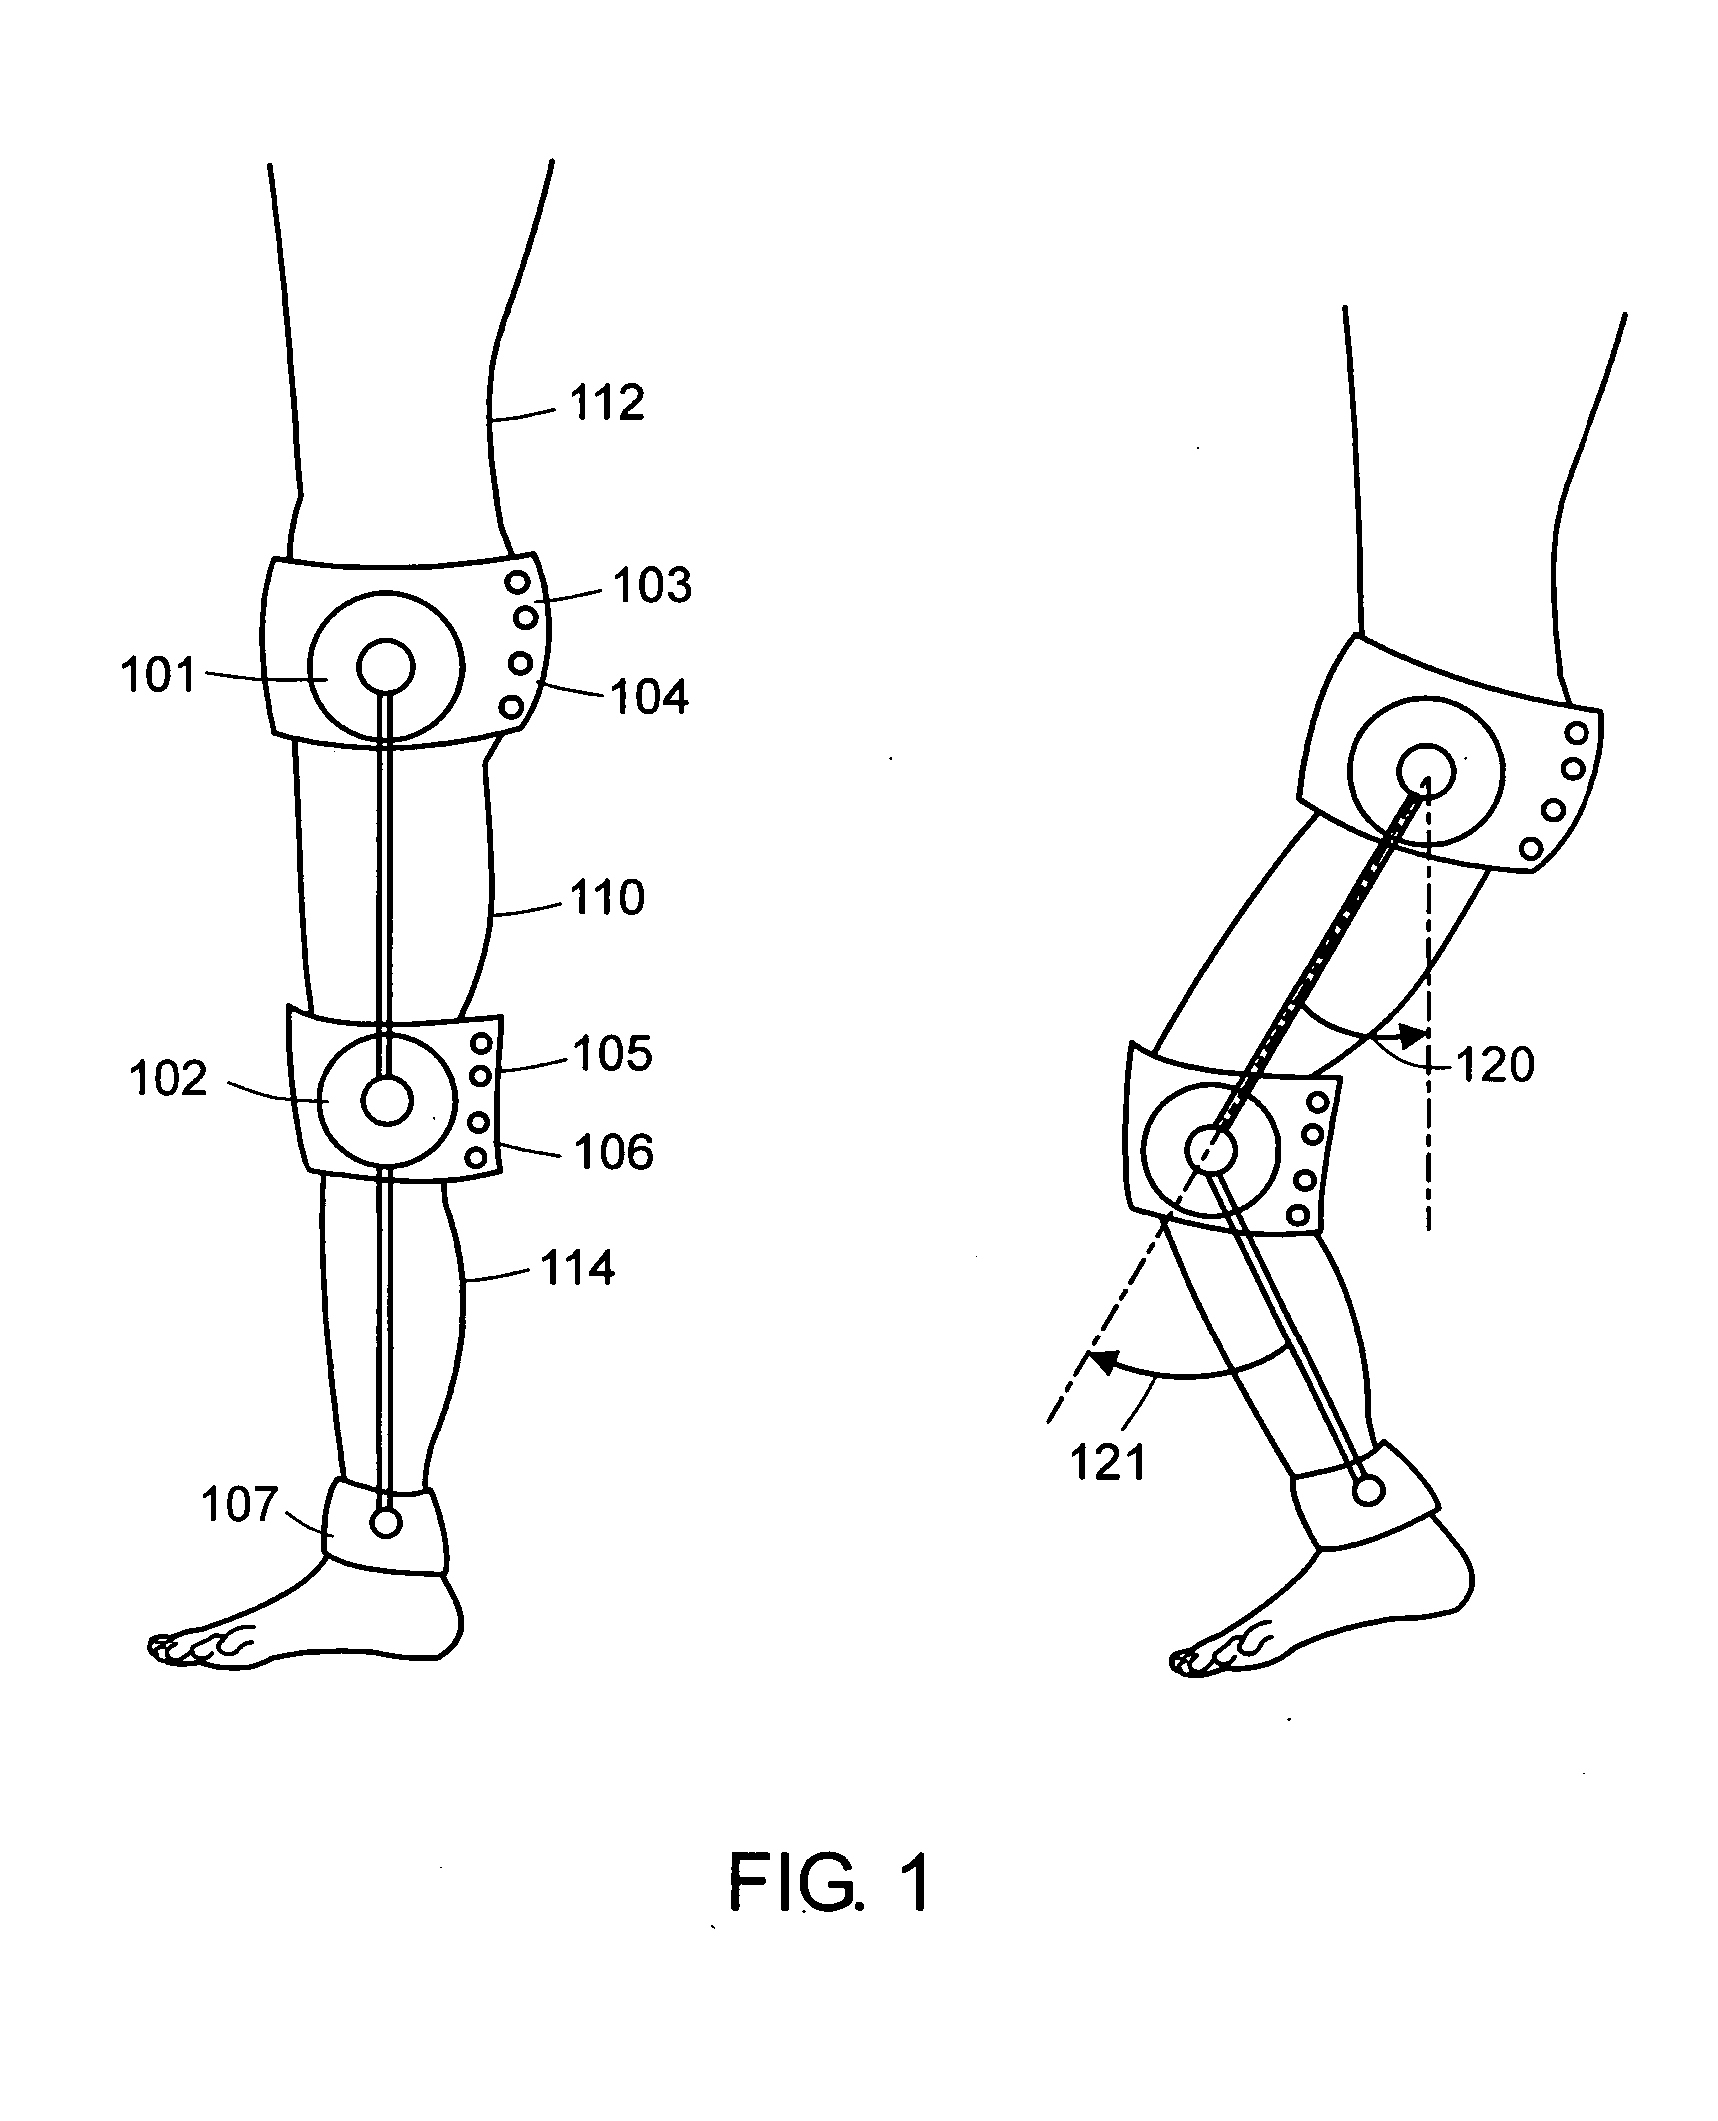 Apparatus and method for characterizing contributions of forces associated with a body part of a subject